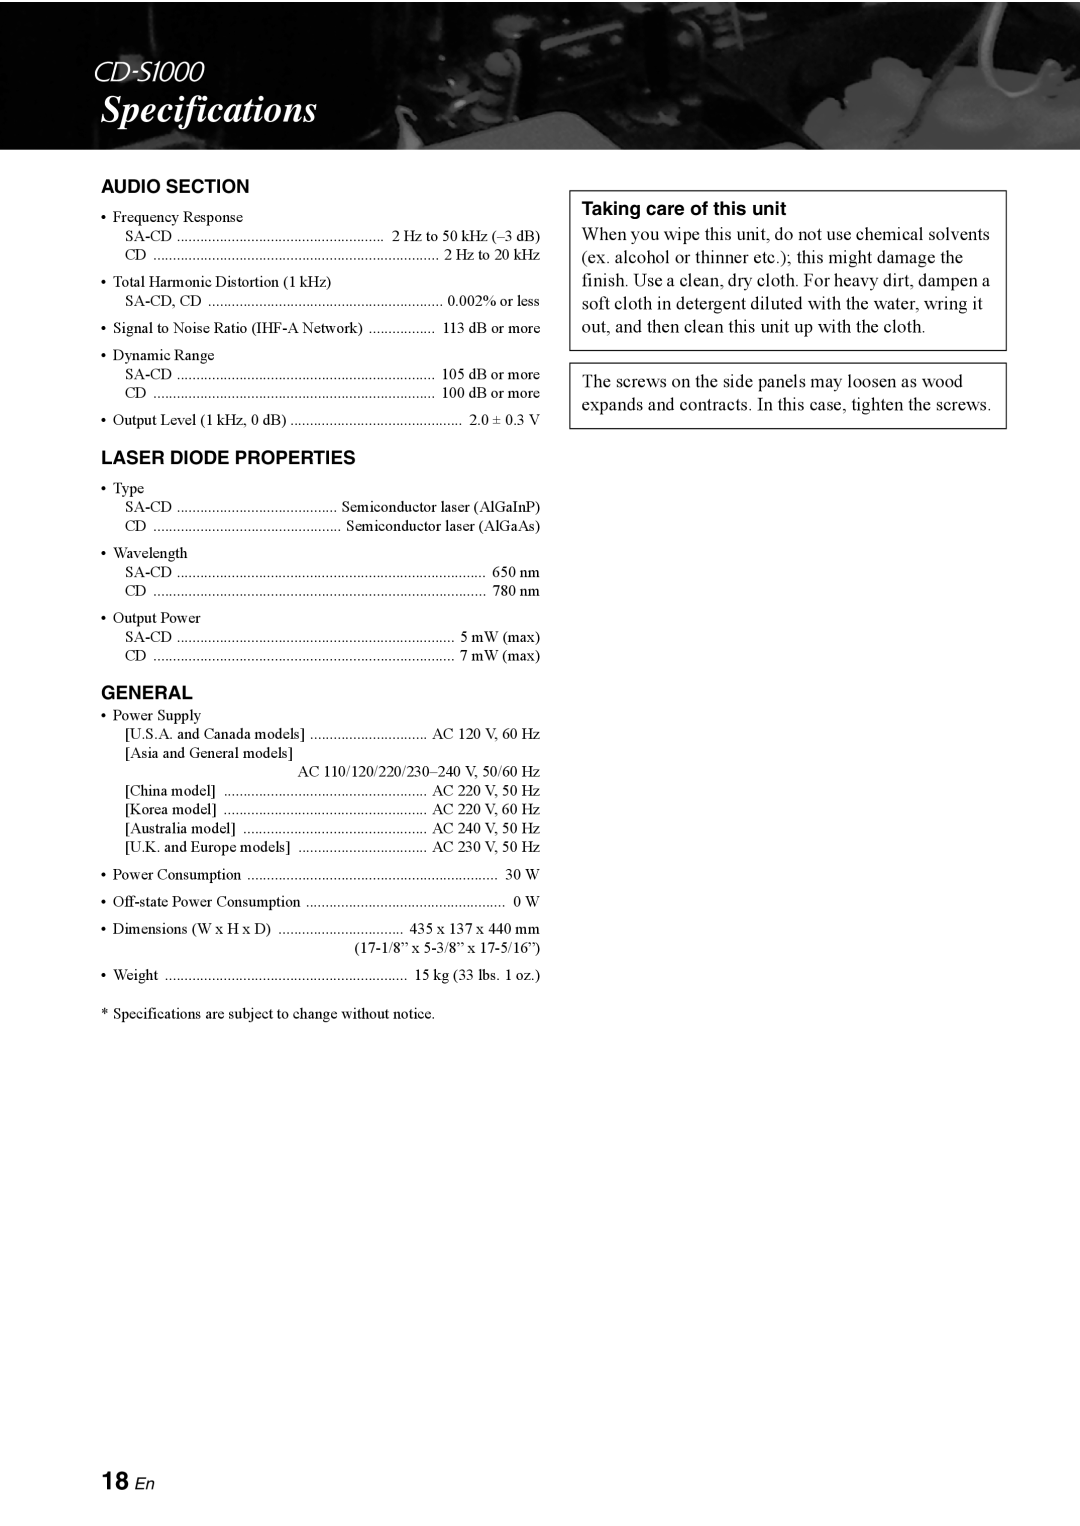 Yamaha CD-S1000 owner manual Specifications, 18 En 